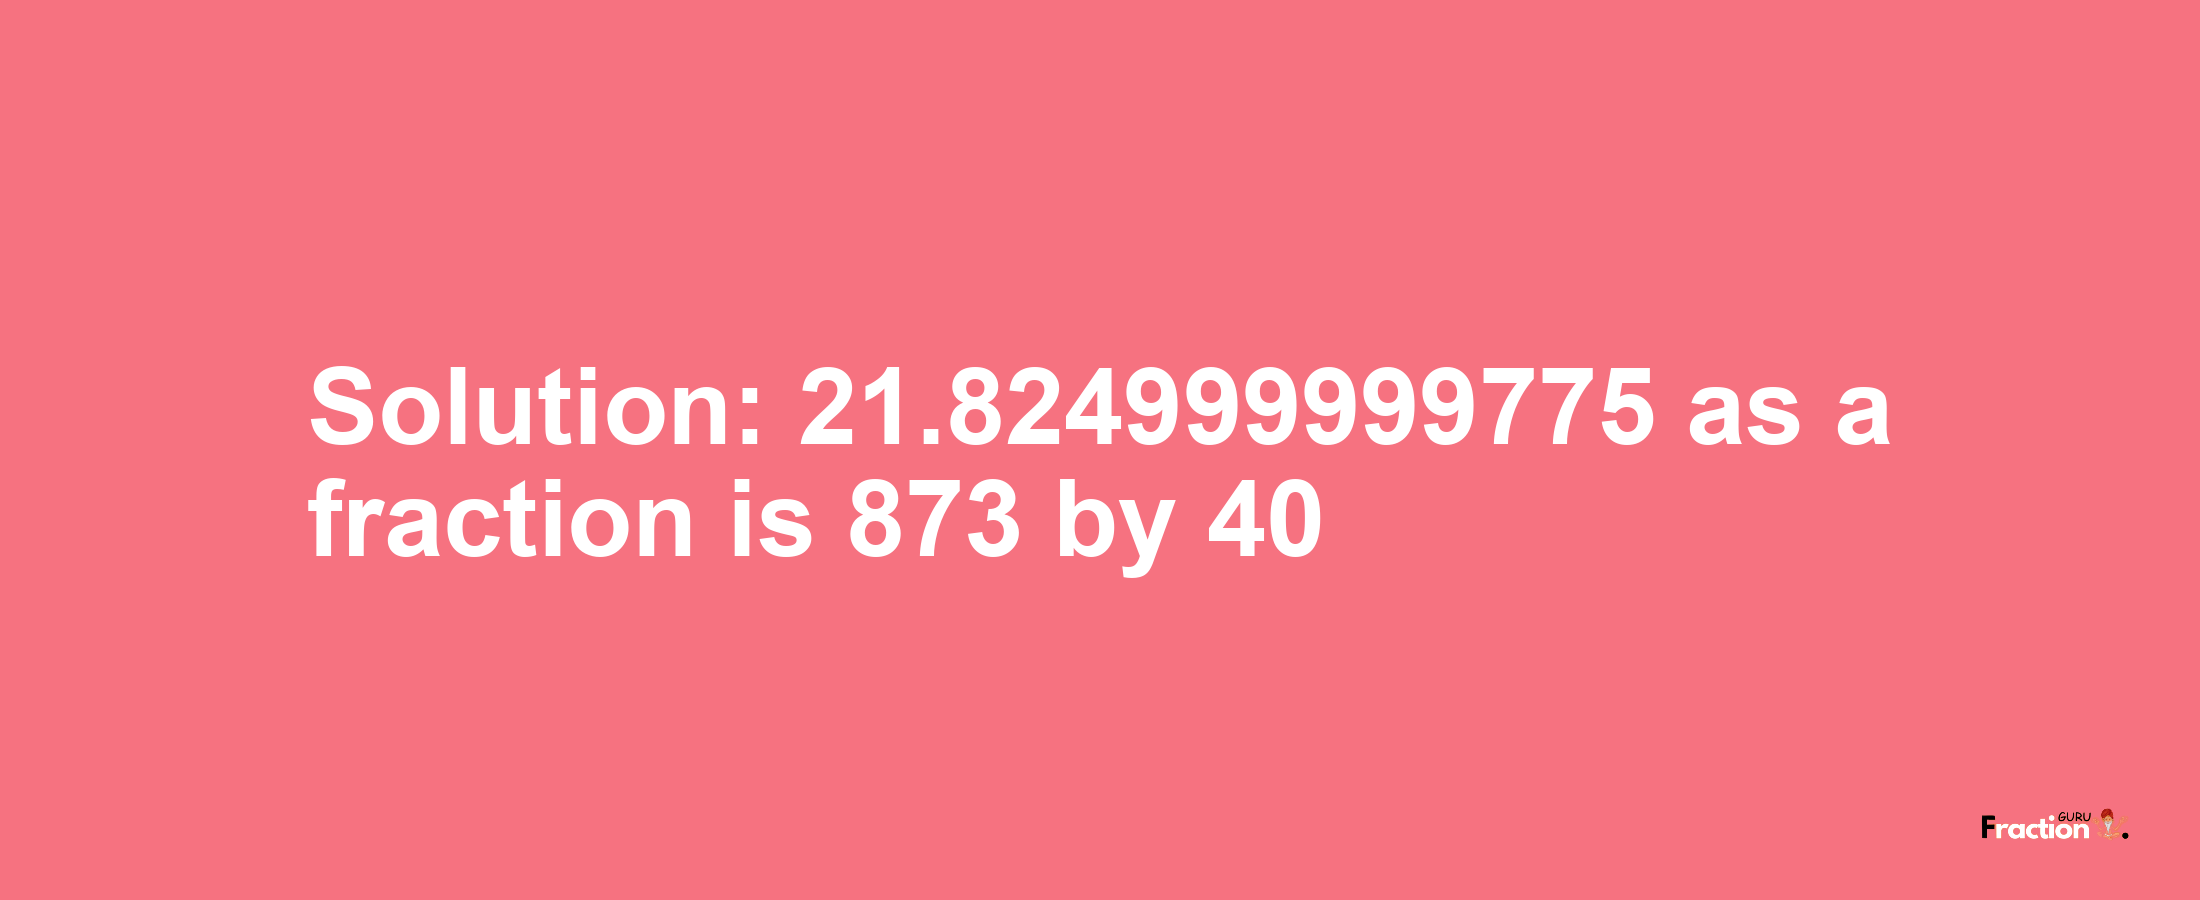 Solution:21.824999999775 as a fraction is 873/40